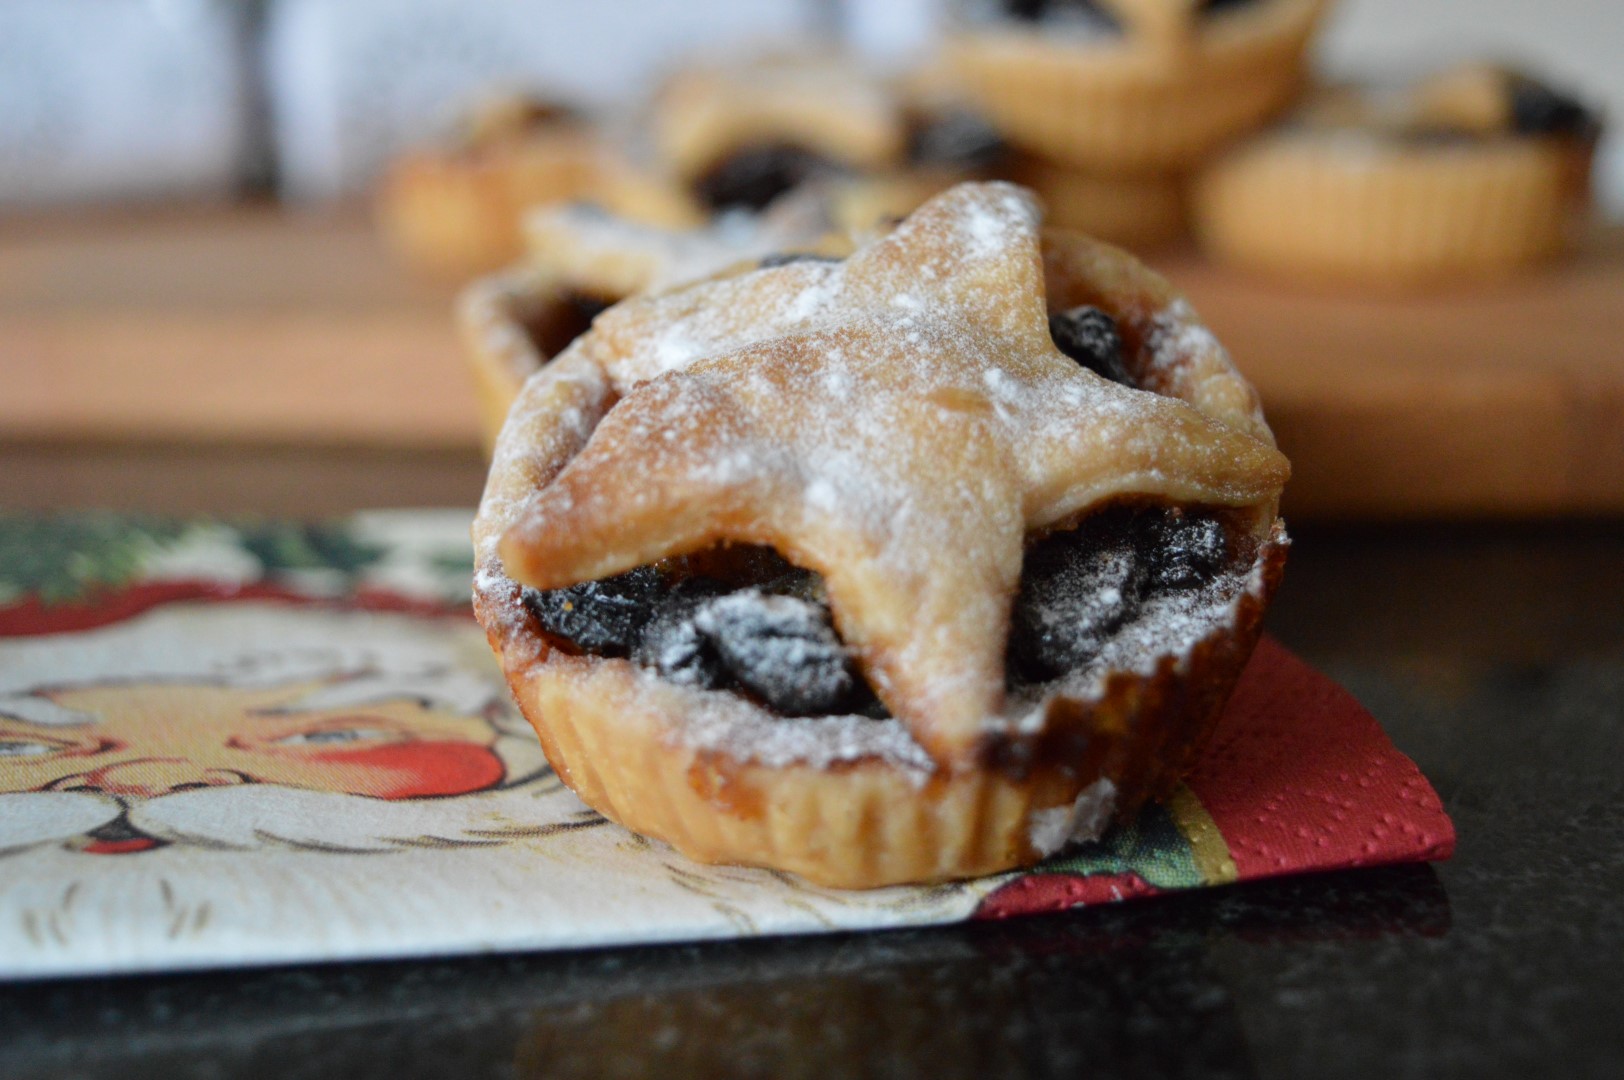 Free from Mince pies